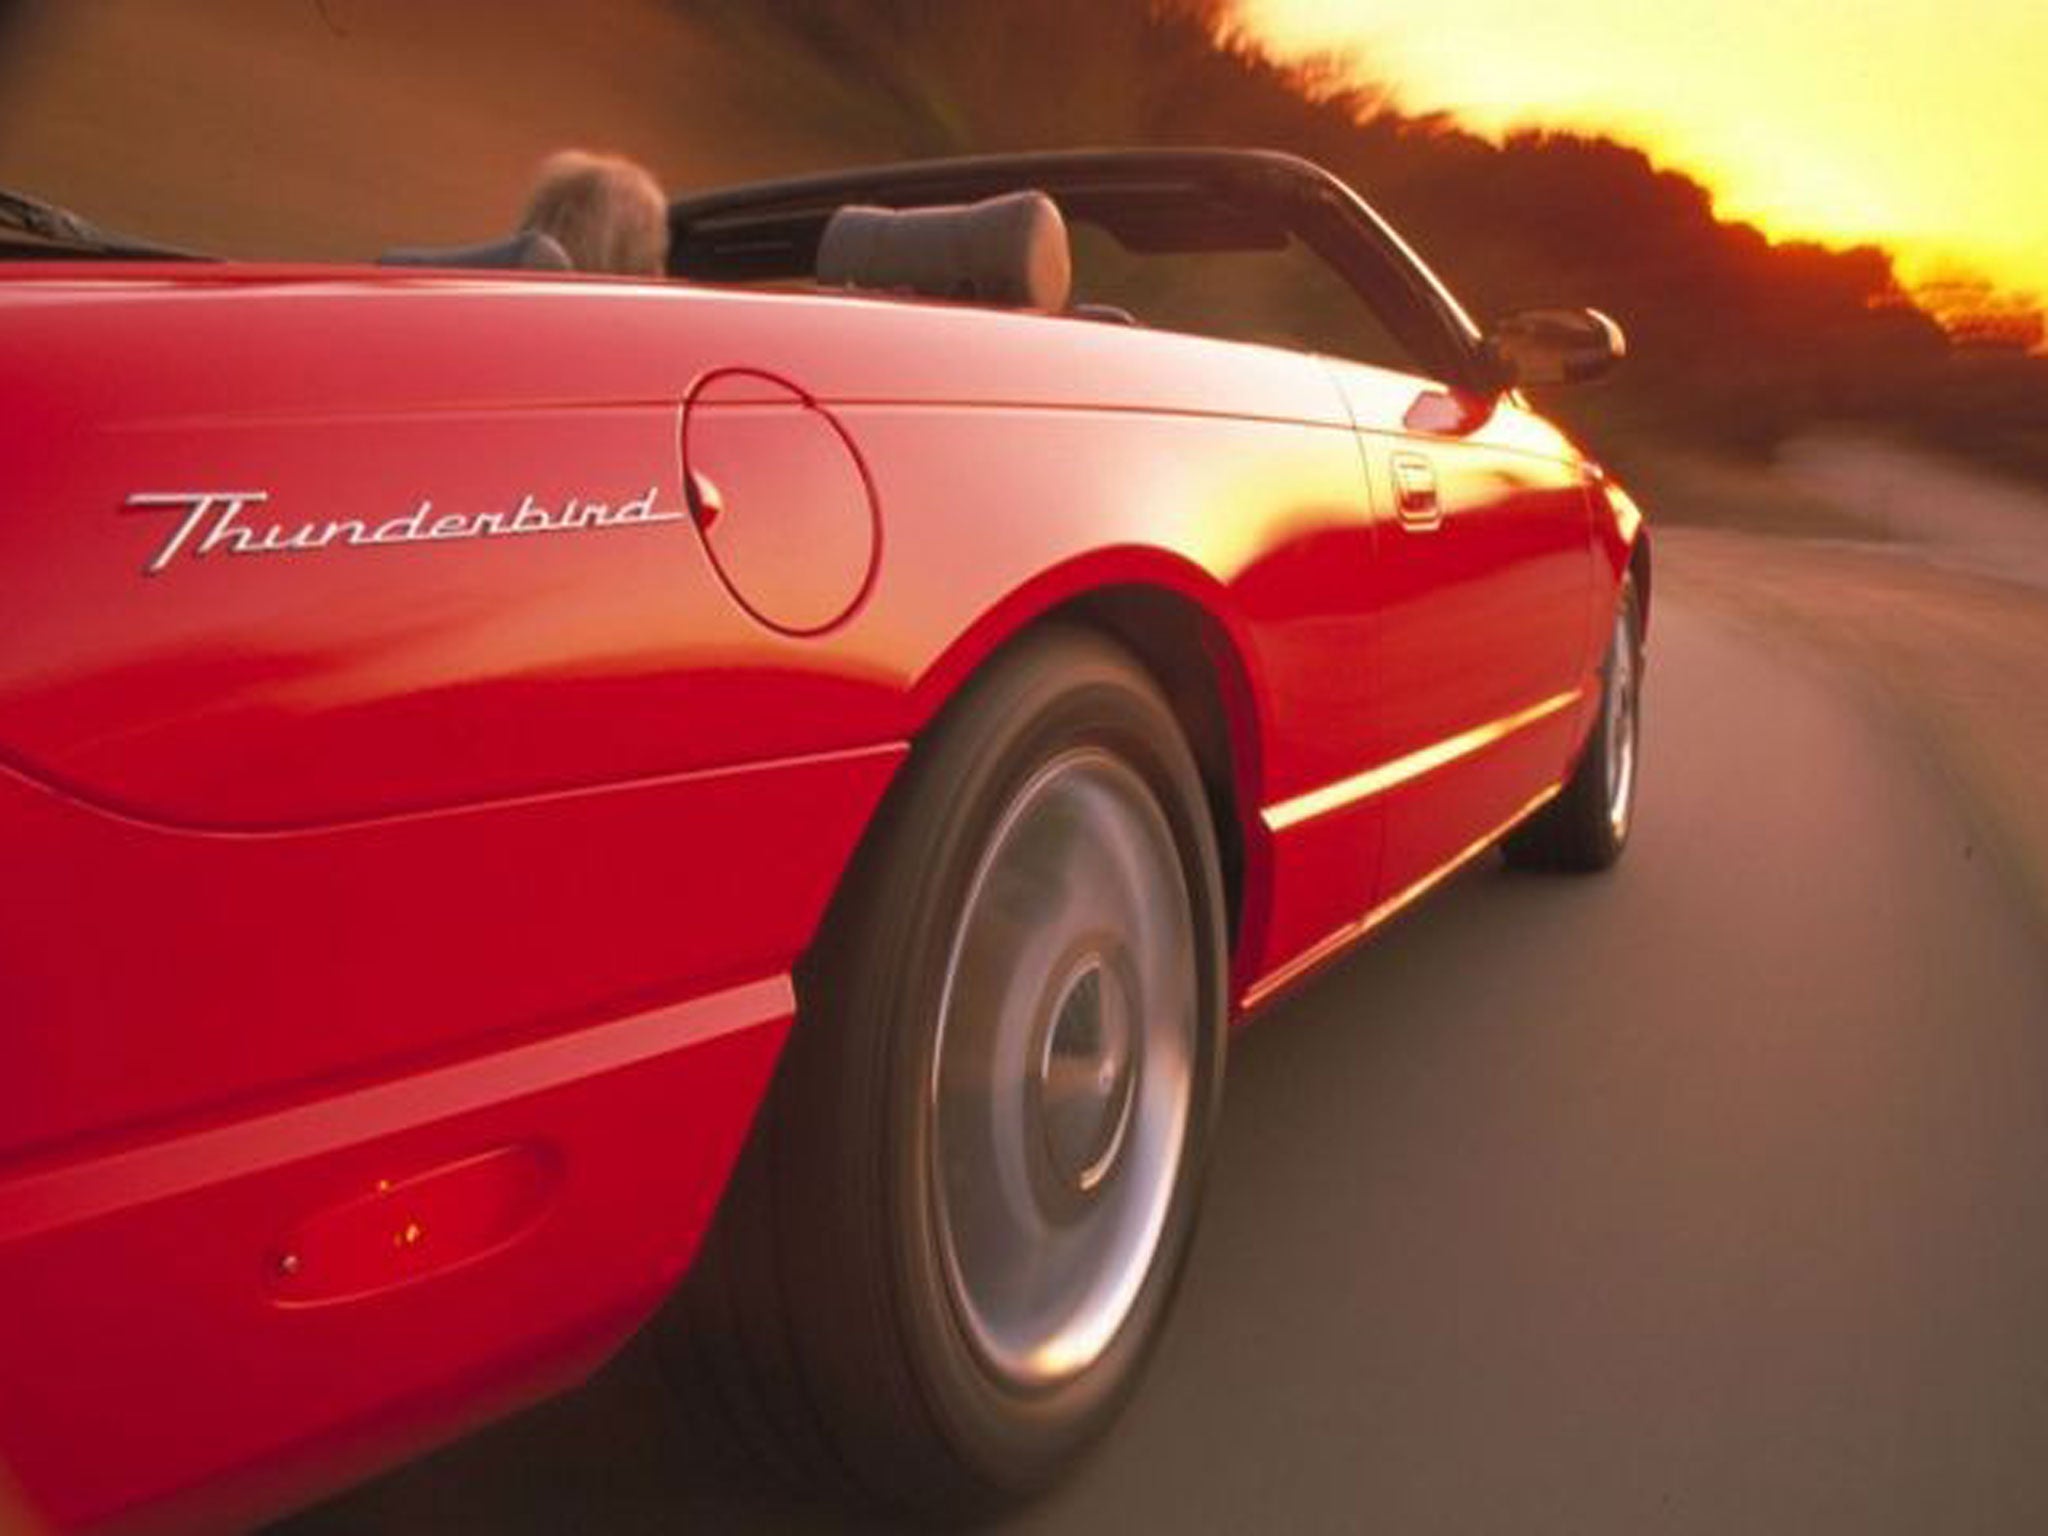 Investors in the fast lane: work your Isas hard and you could live the aspirational dream where luxury purchases such as a Ford Thunderbird are within your reach